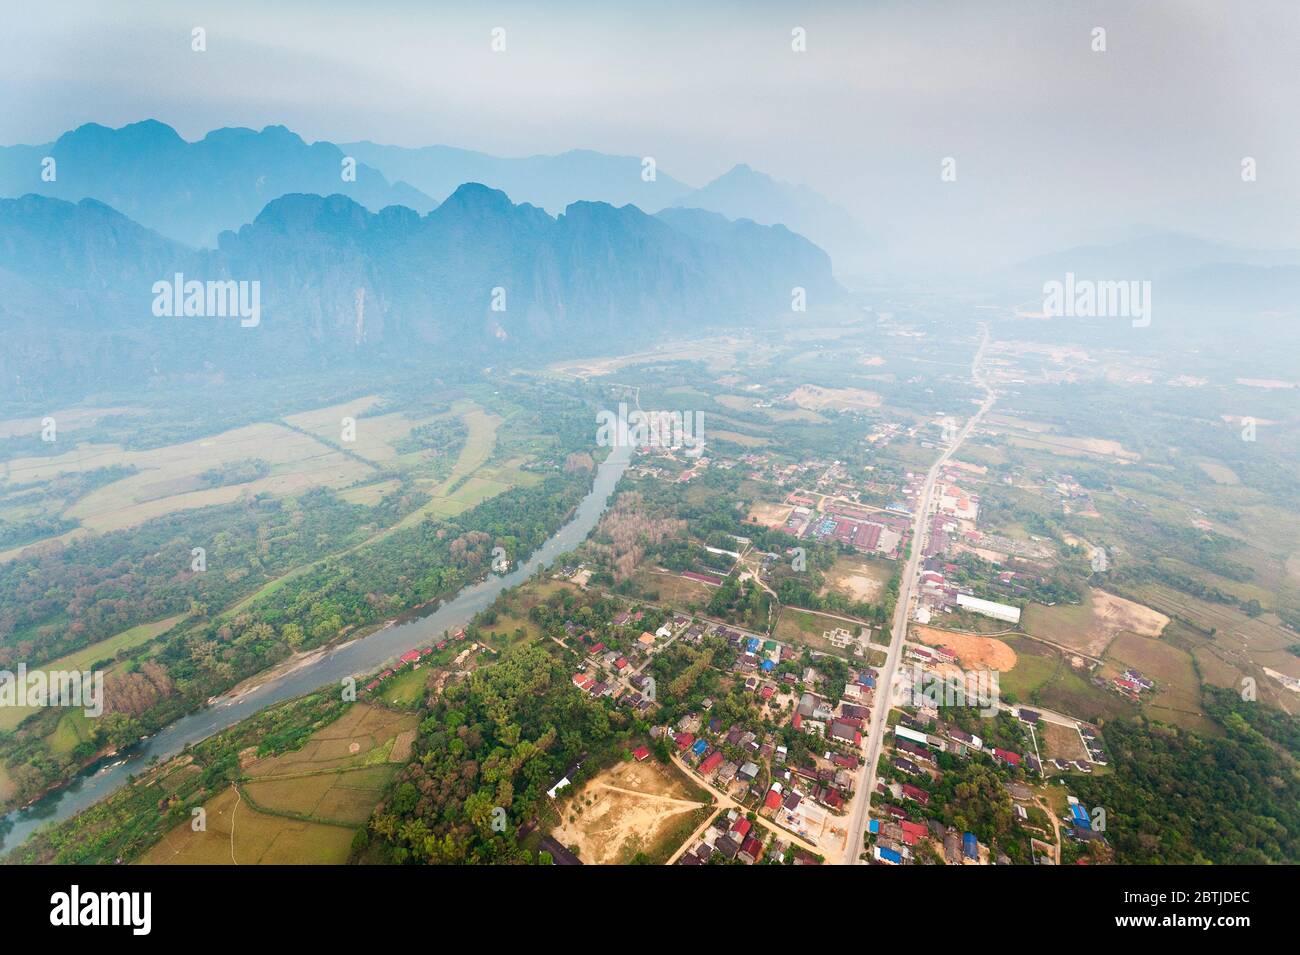 Aerial view from a Hot Air Balloon over Vang Vieng town, the Nam Song River and the  limestone mountains. Vang Vieng, Laos, Southeast Asia Stock Photo